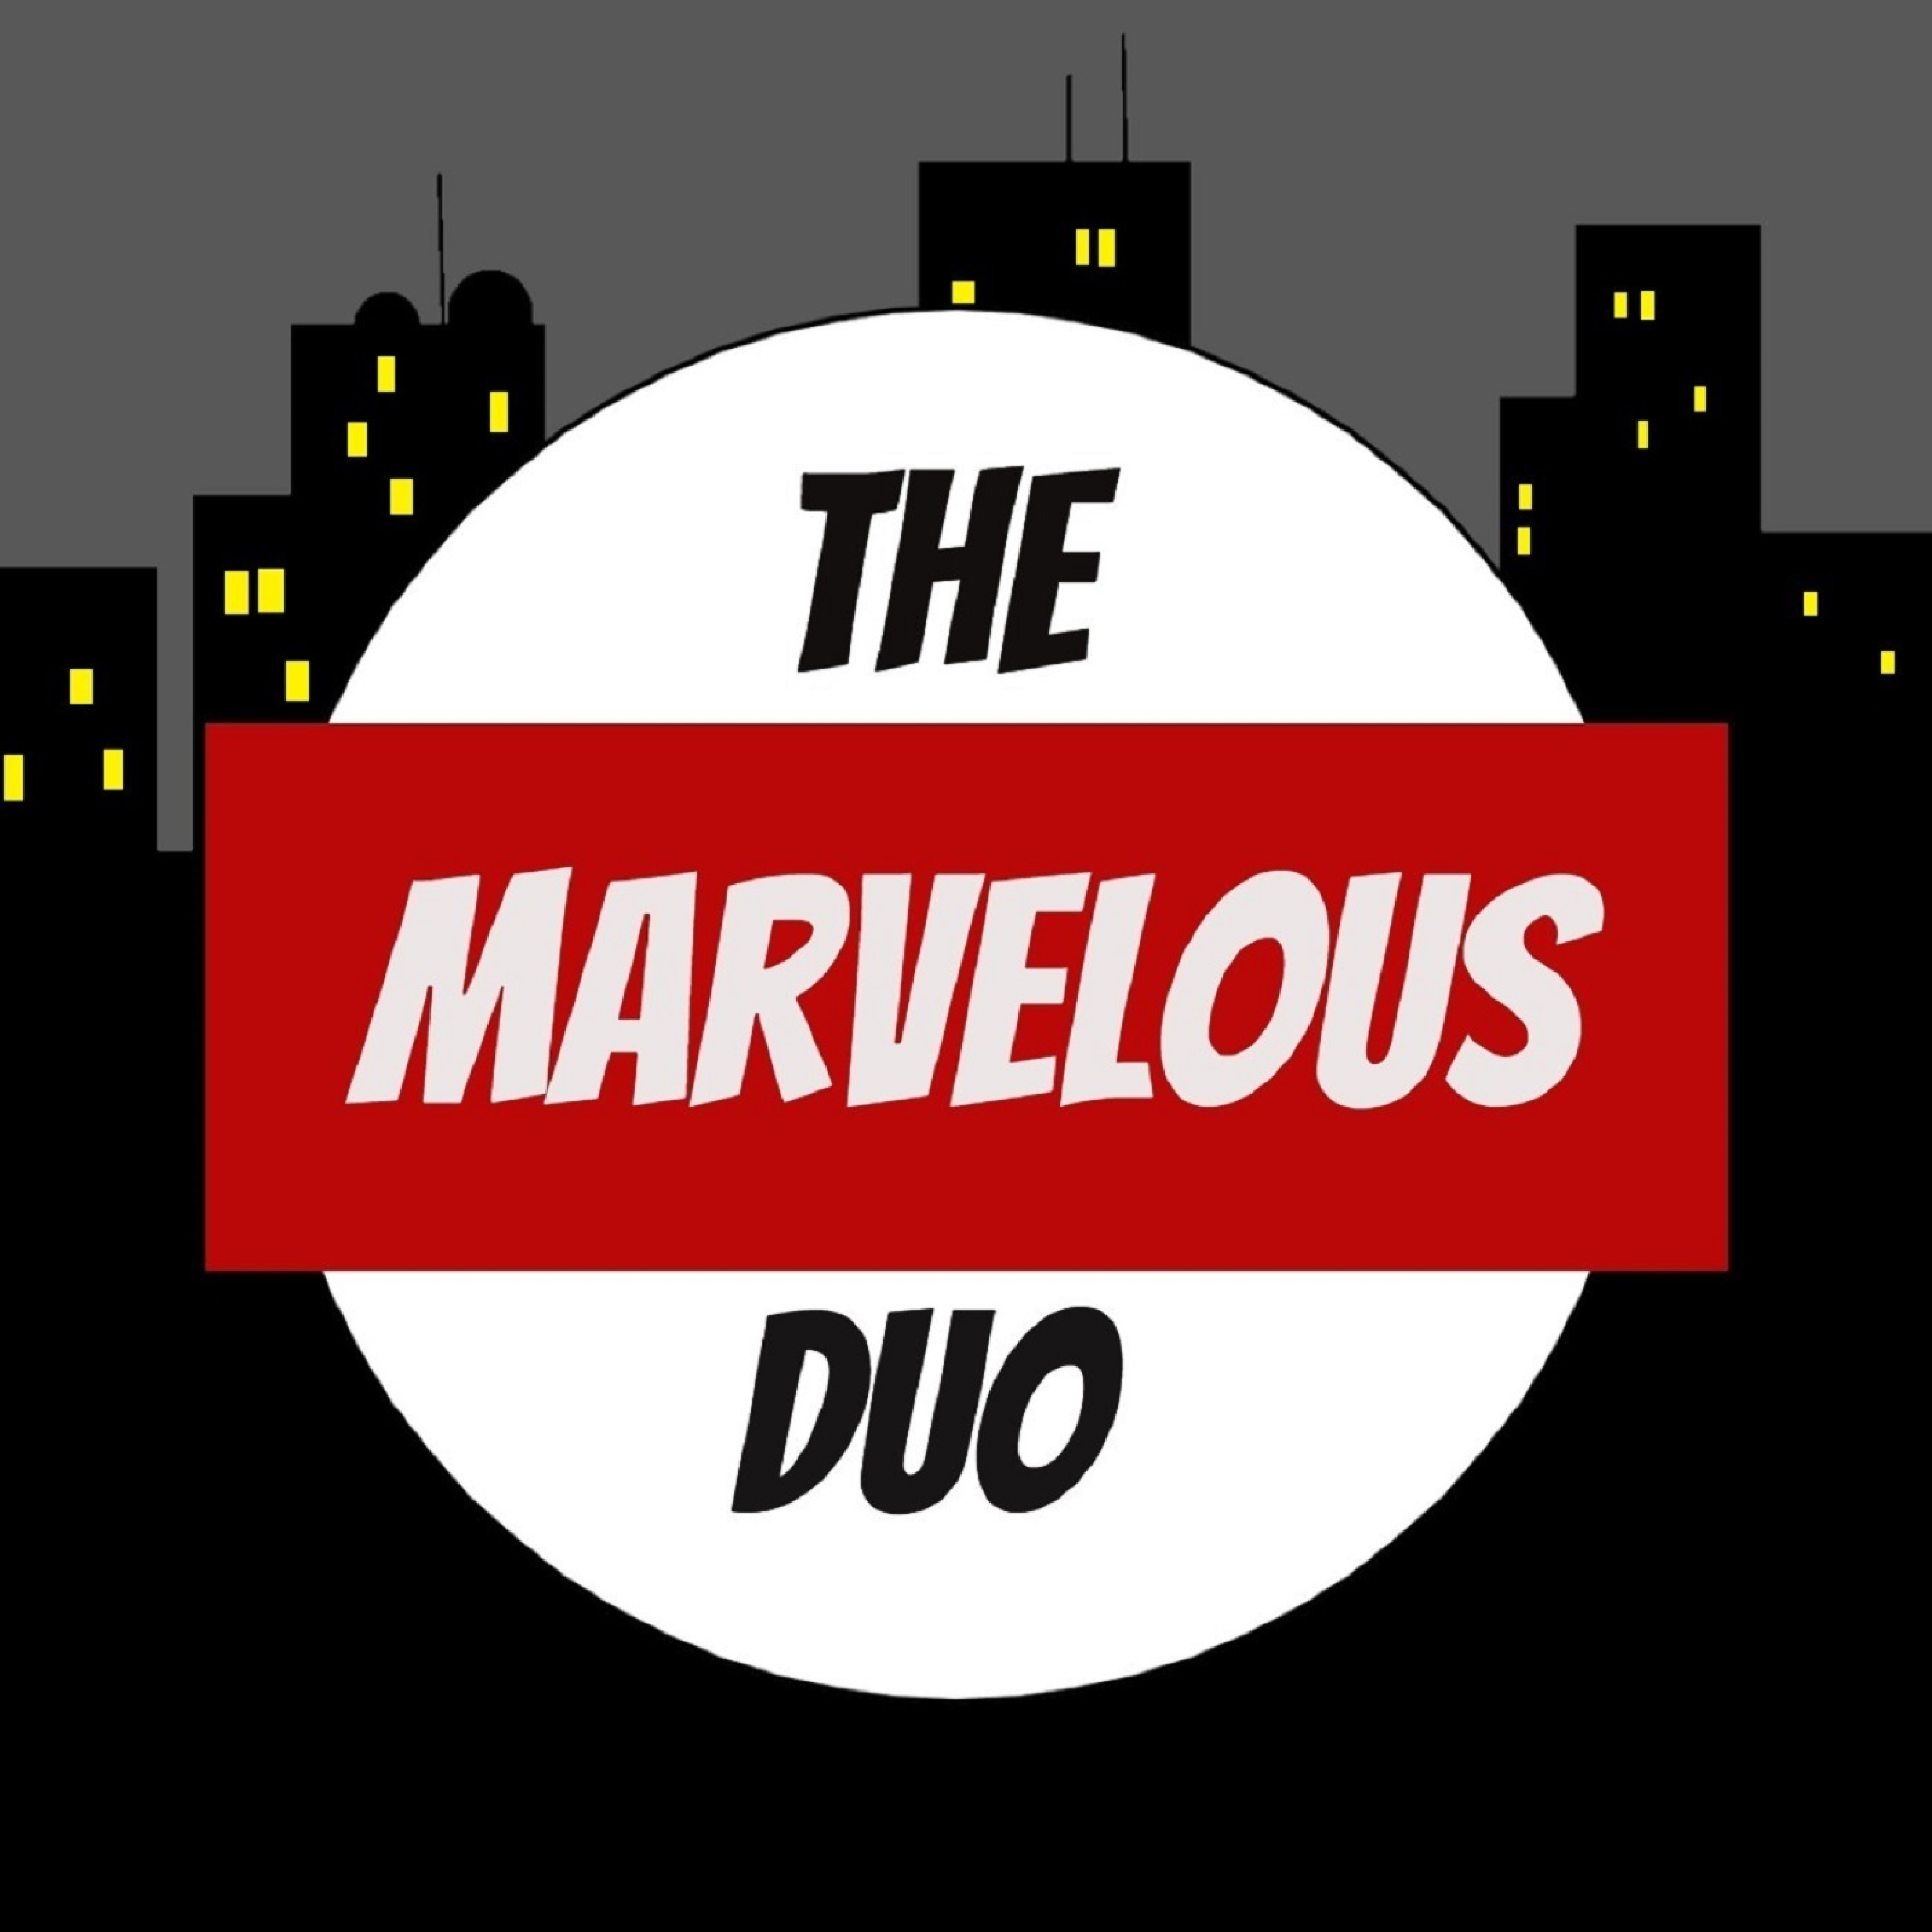 The Marvelous Duo